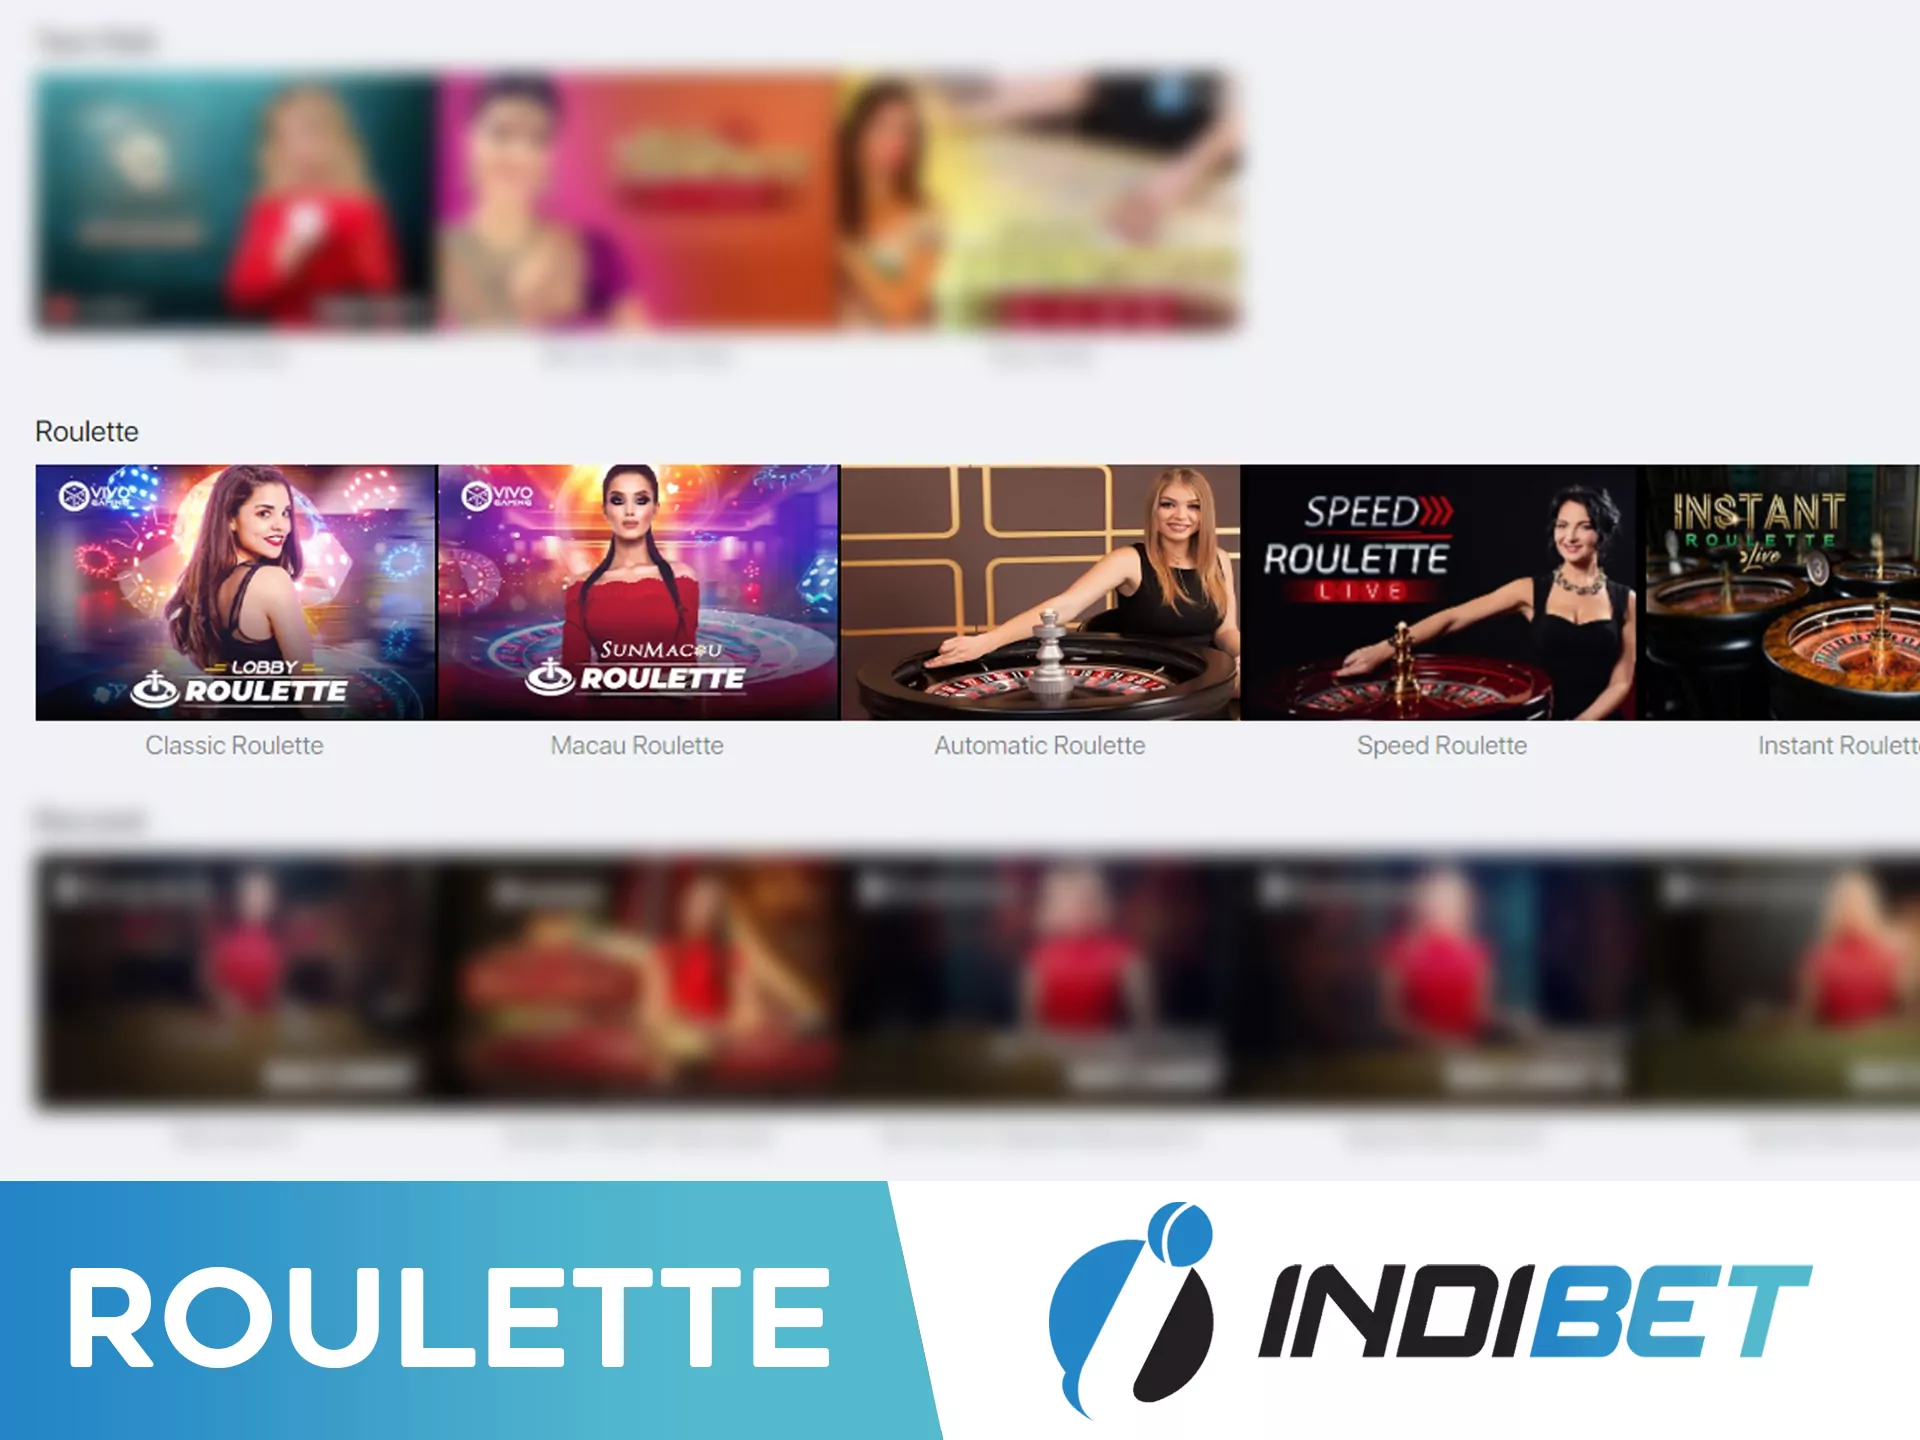 Indibet offers many roulette games in its casino.